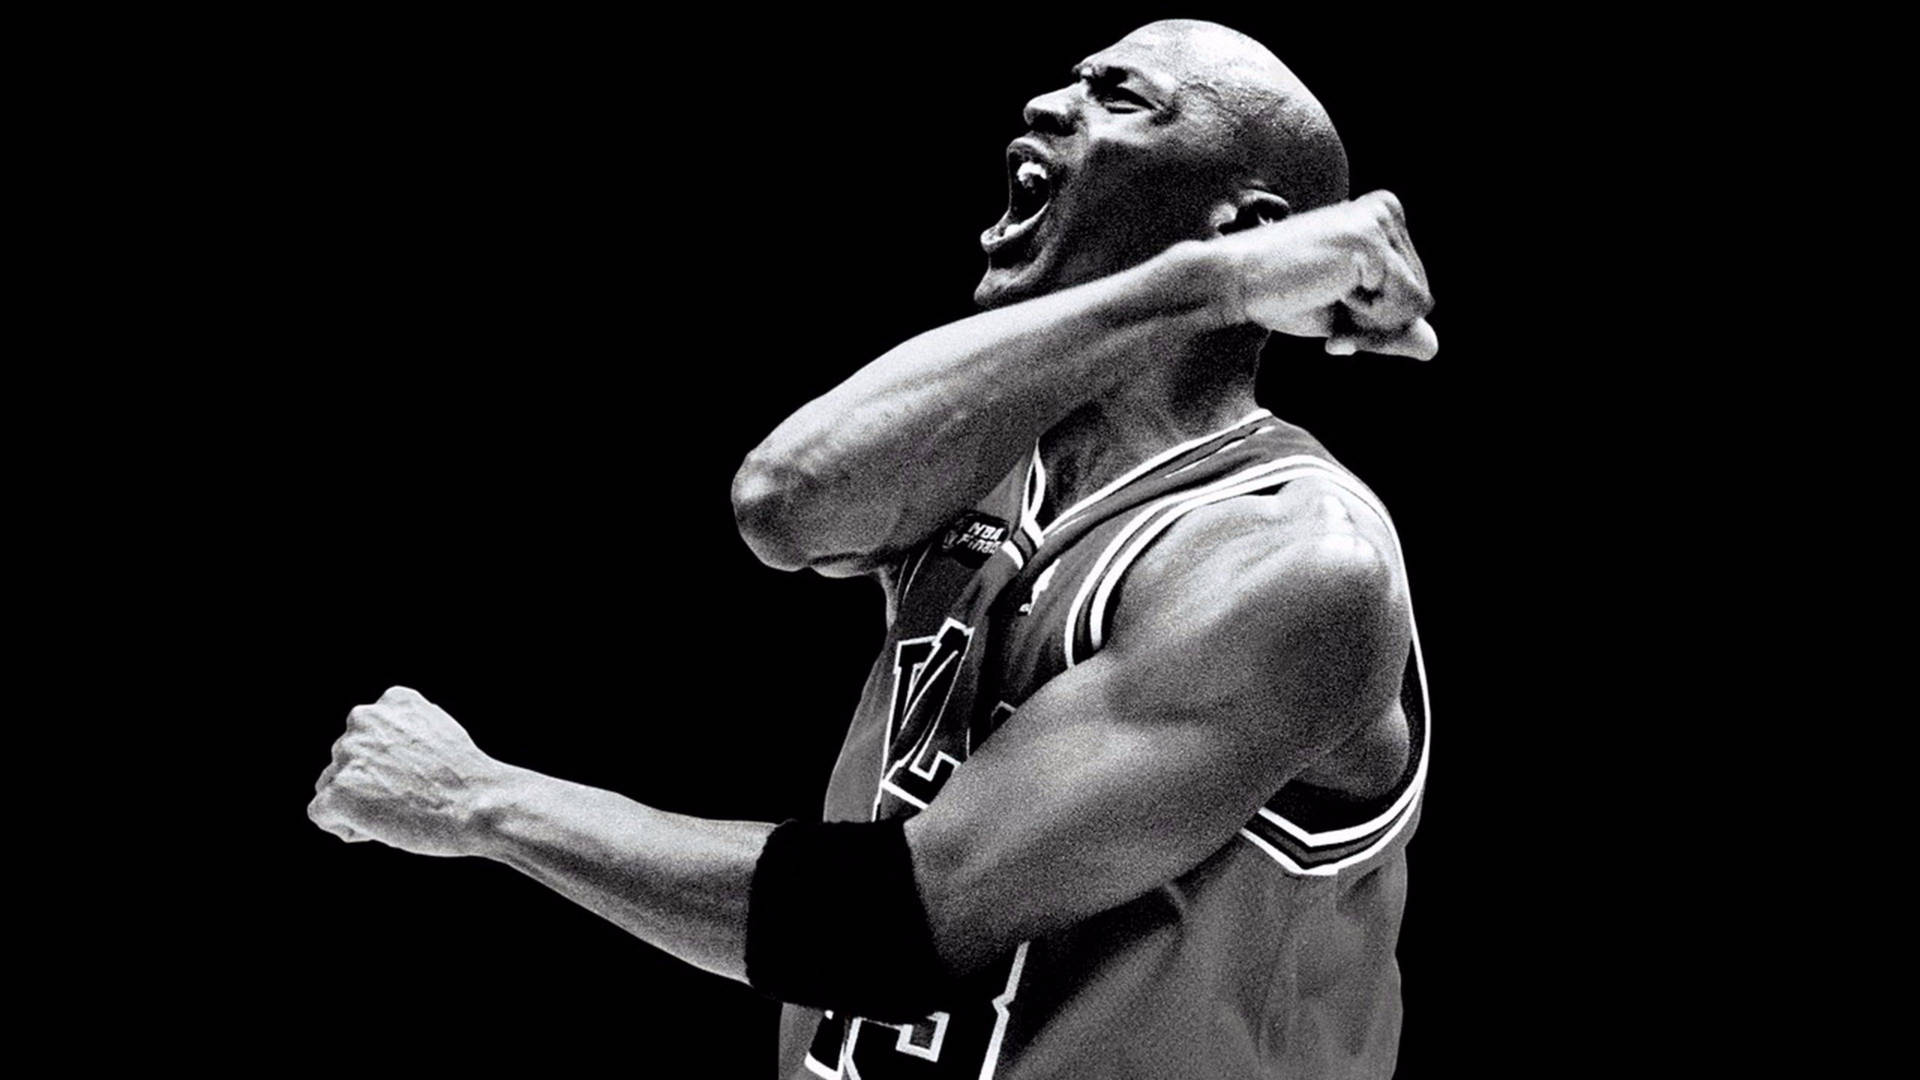 The Iconic Michael Jordan - The Greatest Of All Time Background